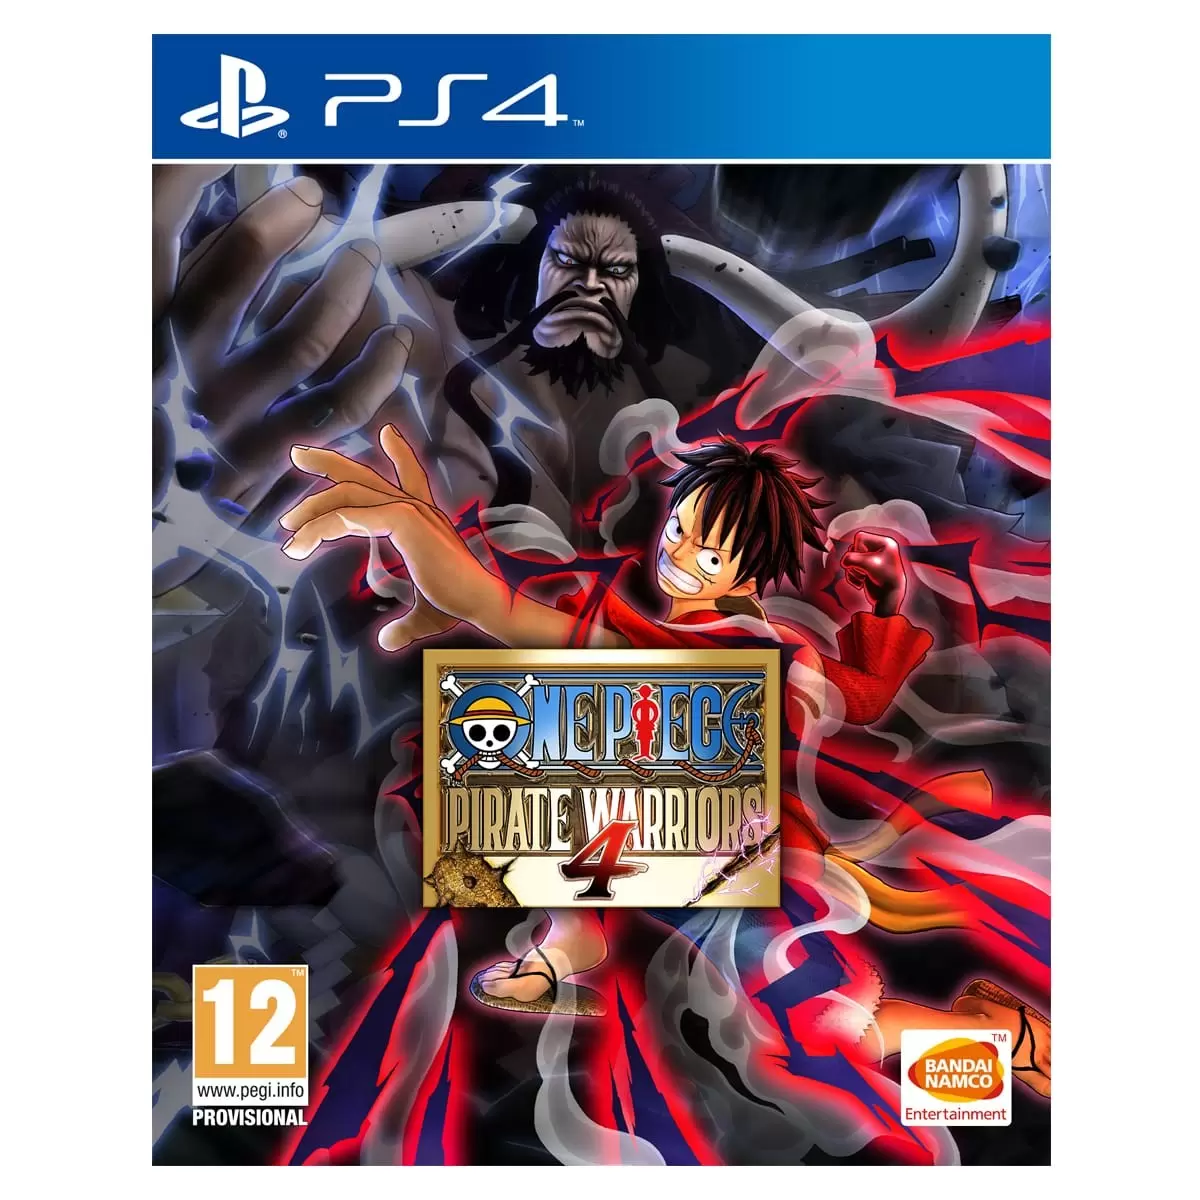 Playstation 4 one piece